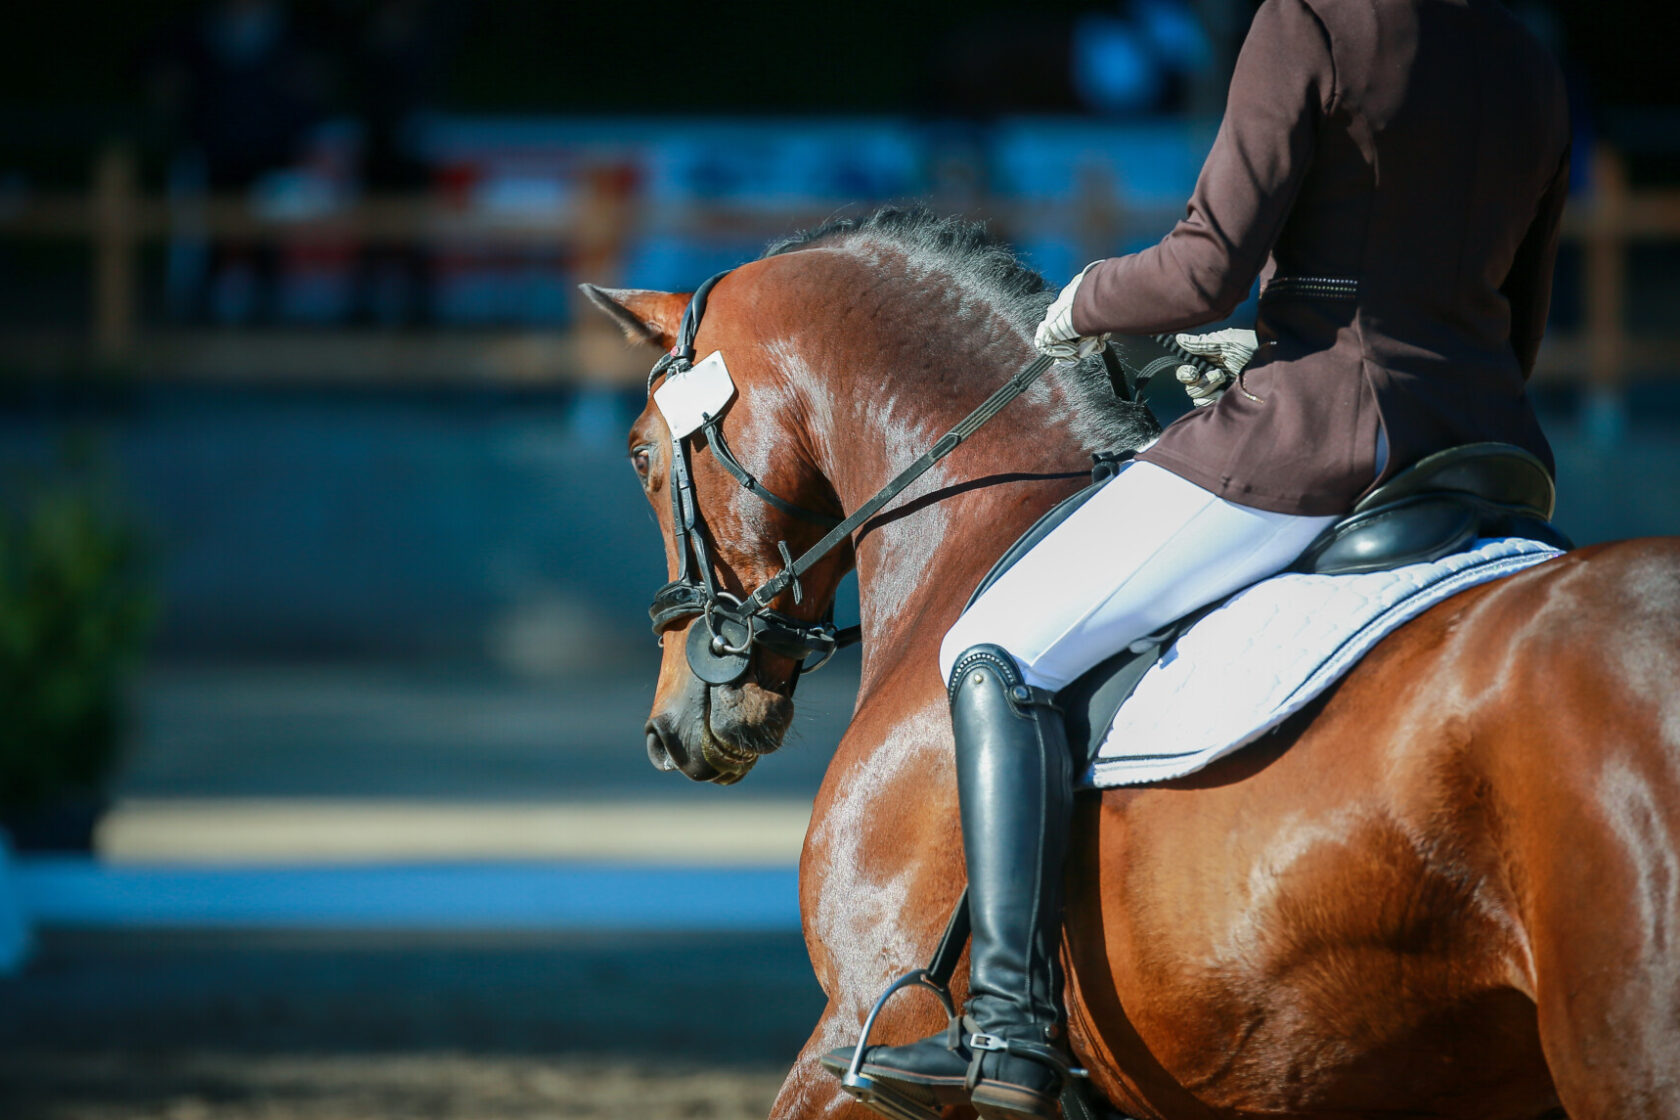 Dressage,Horse,With,Rider,In,Close Up,During,A,Test,At